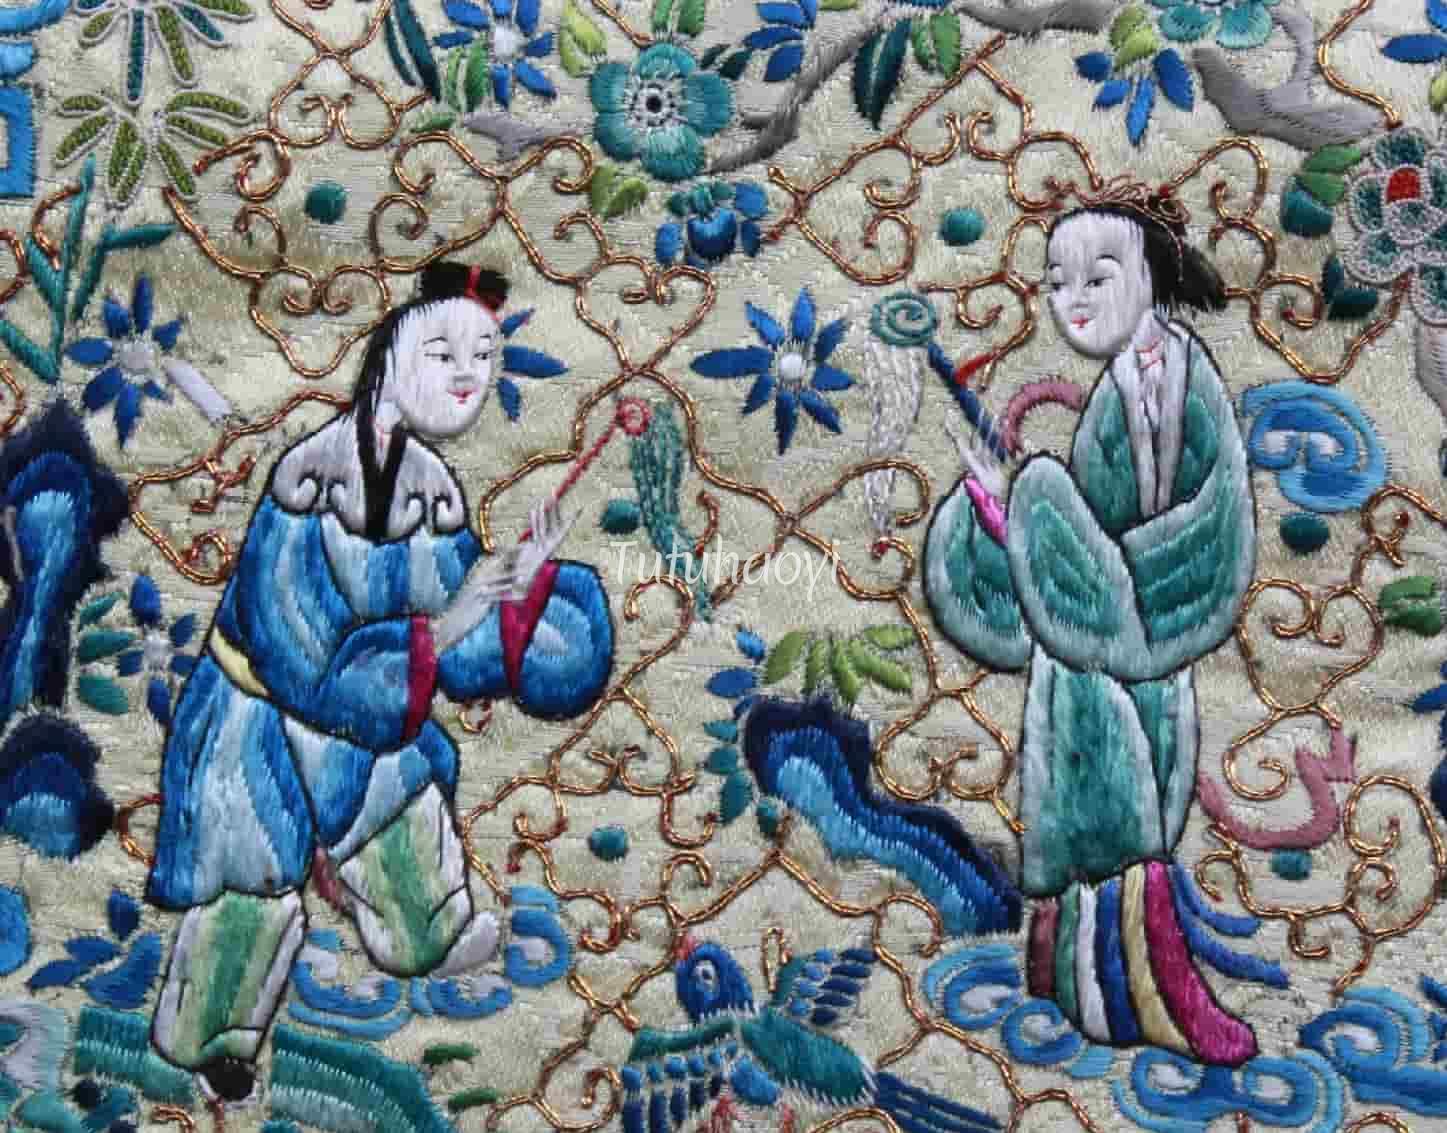 clothes embroidery depicting Weaving Maiden and Herd Boy reuniting 